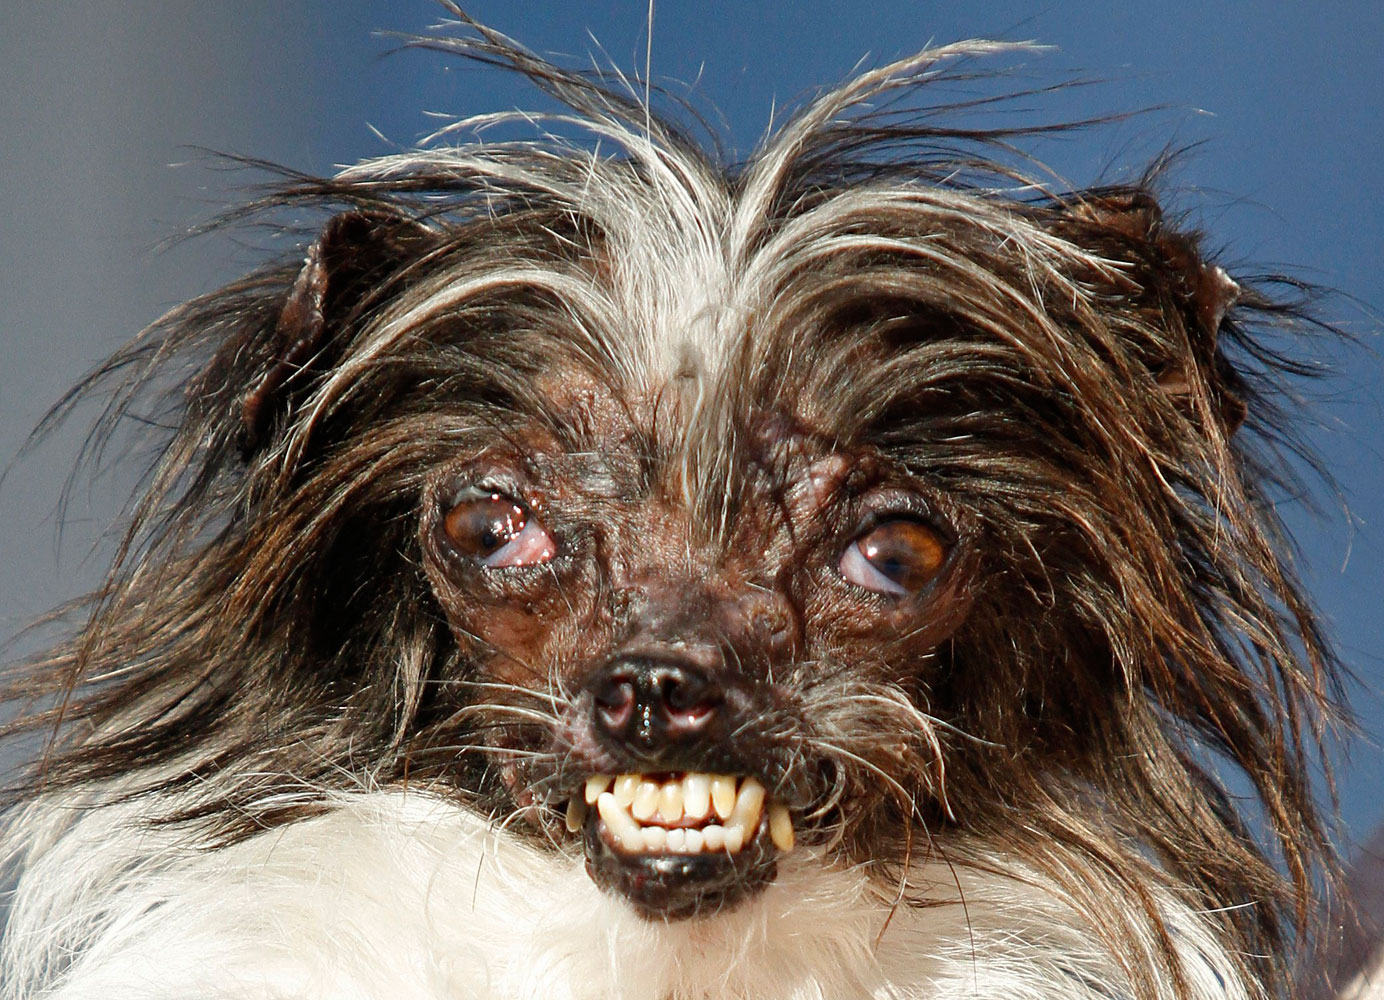 Peanut, a two-year-old mutt is held by Holly Chandler, his owner, after winning the World's Ugliest Dog Contest at the Sonoma-Marin Fair, June 20, 2014, in Petaluma, Calif.